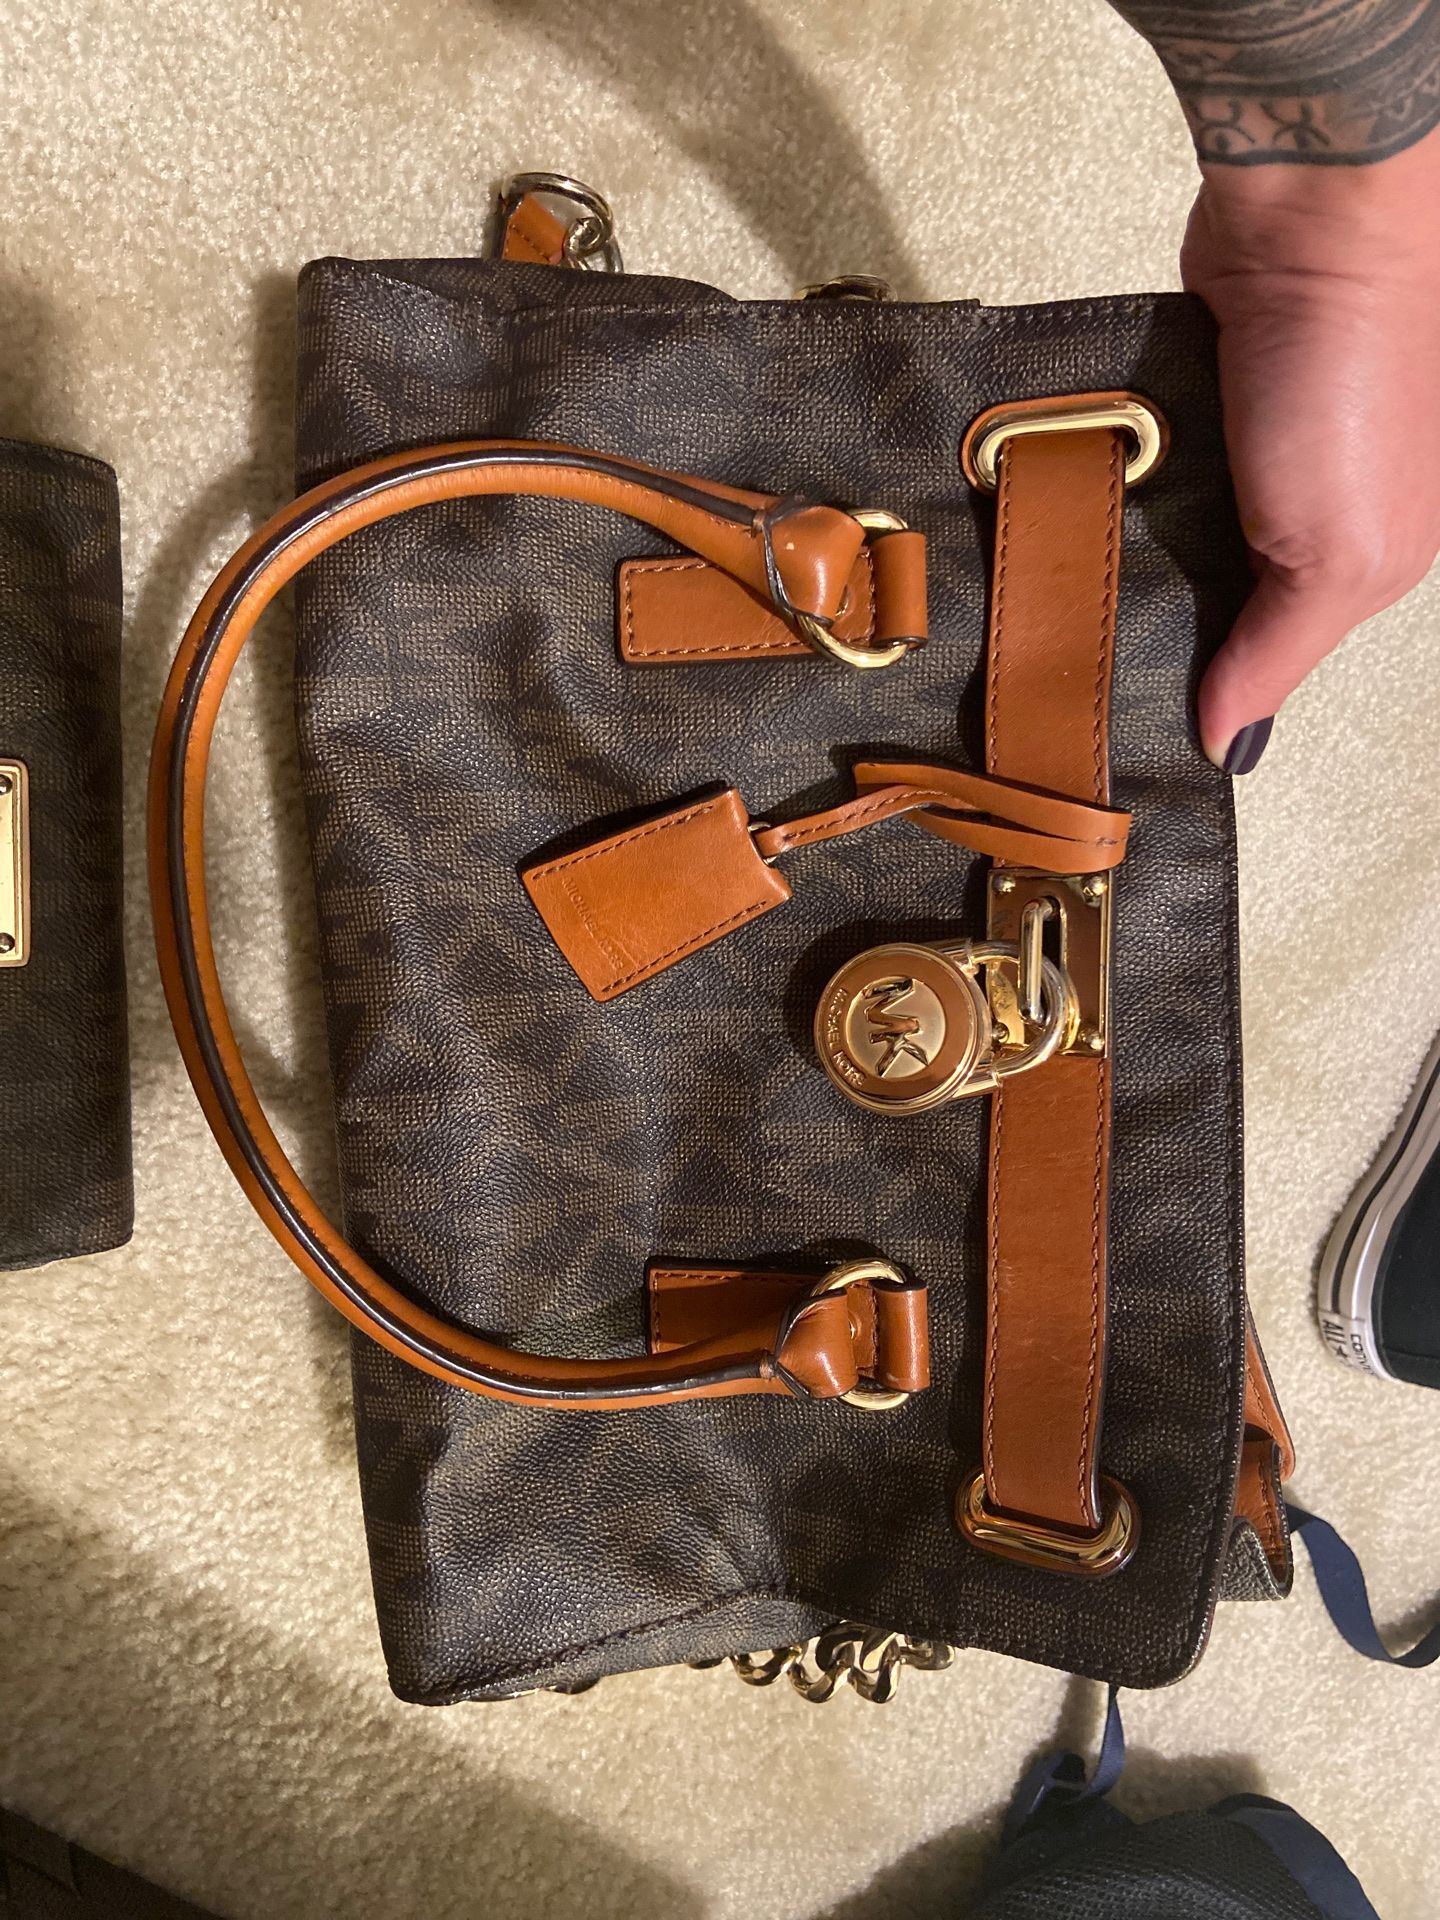 Authentic Michael Kors purse and checkbook wallet